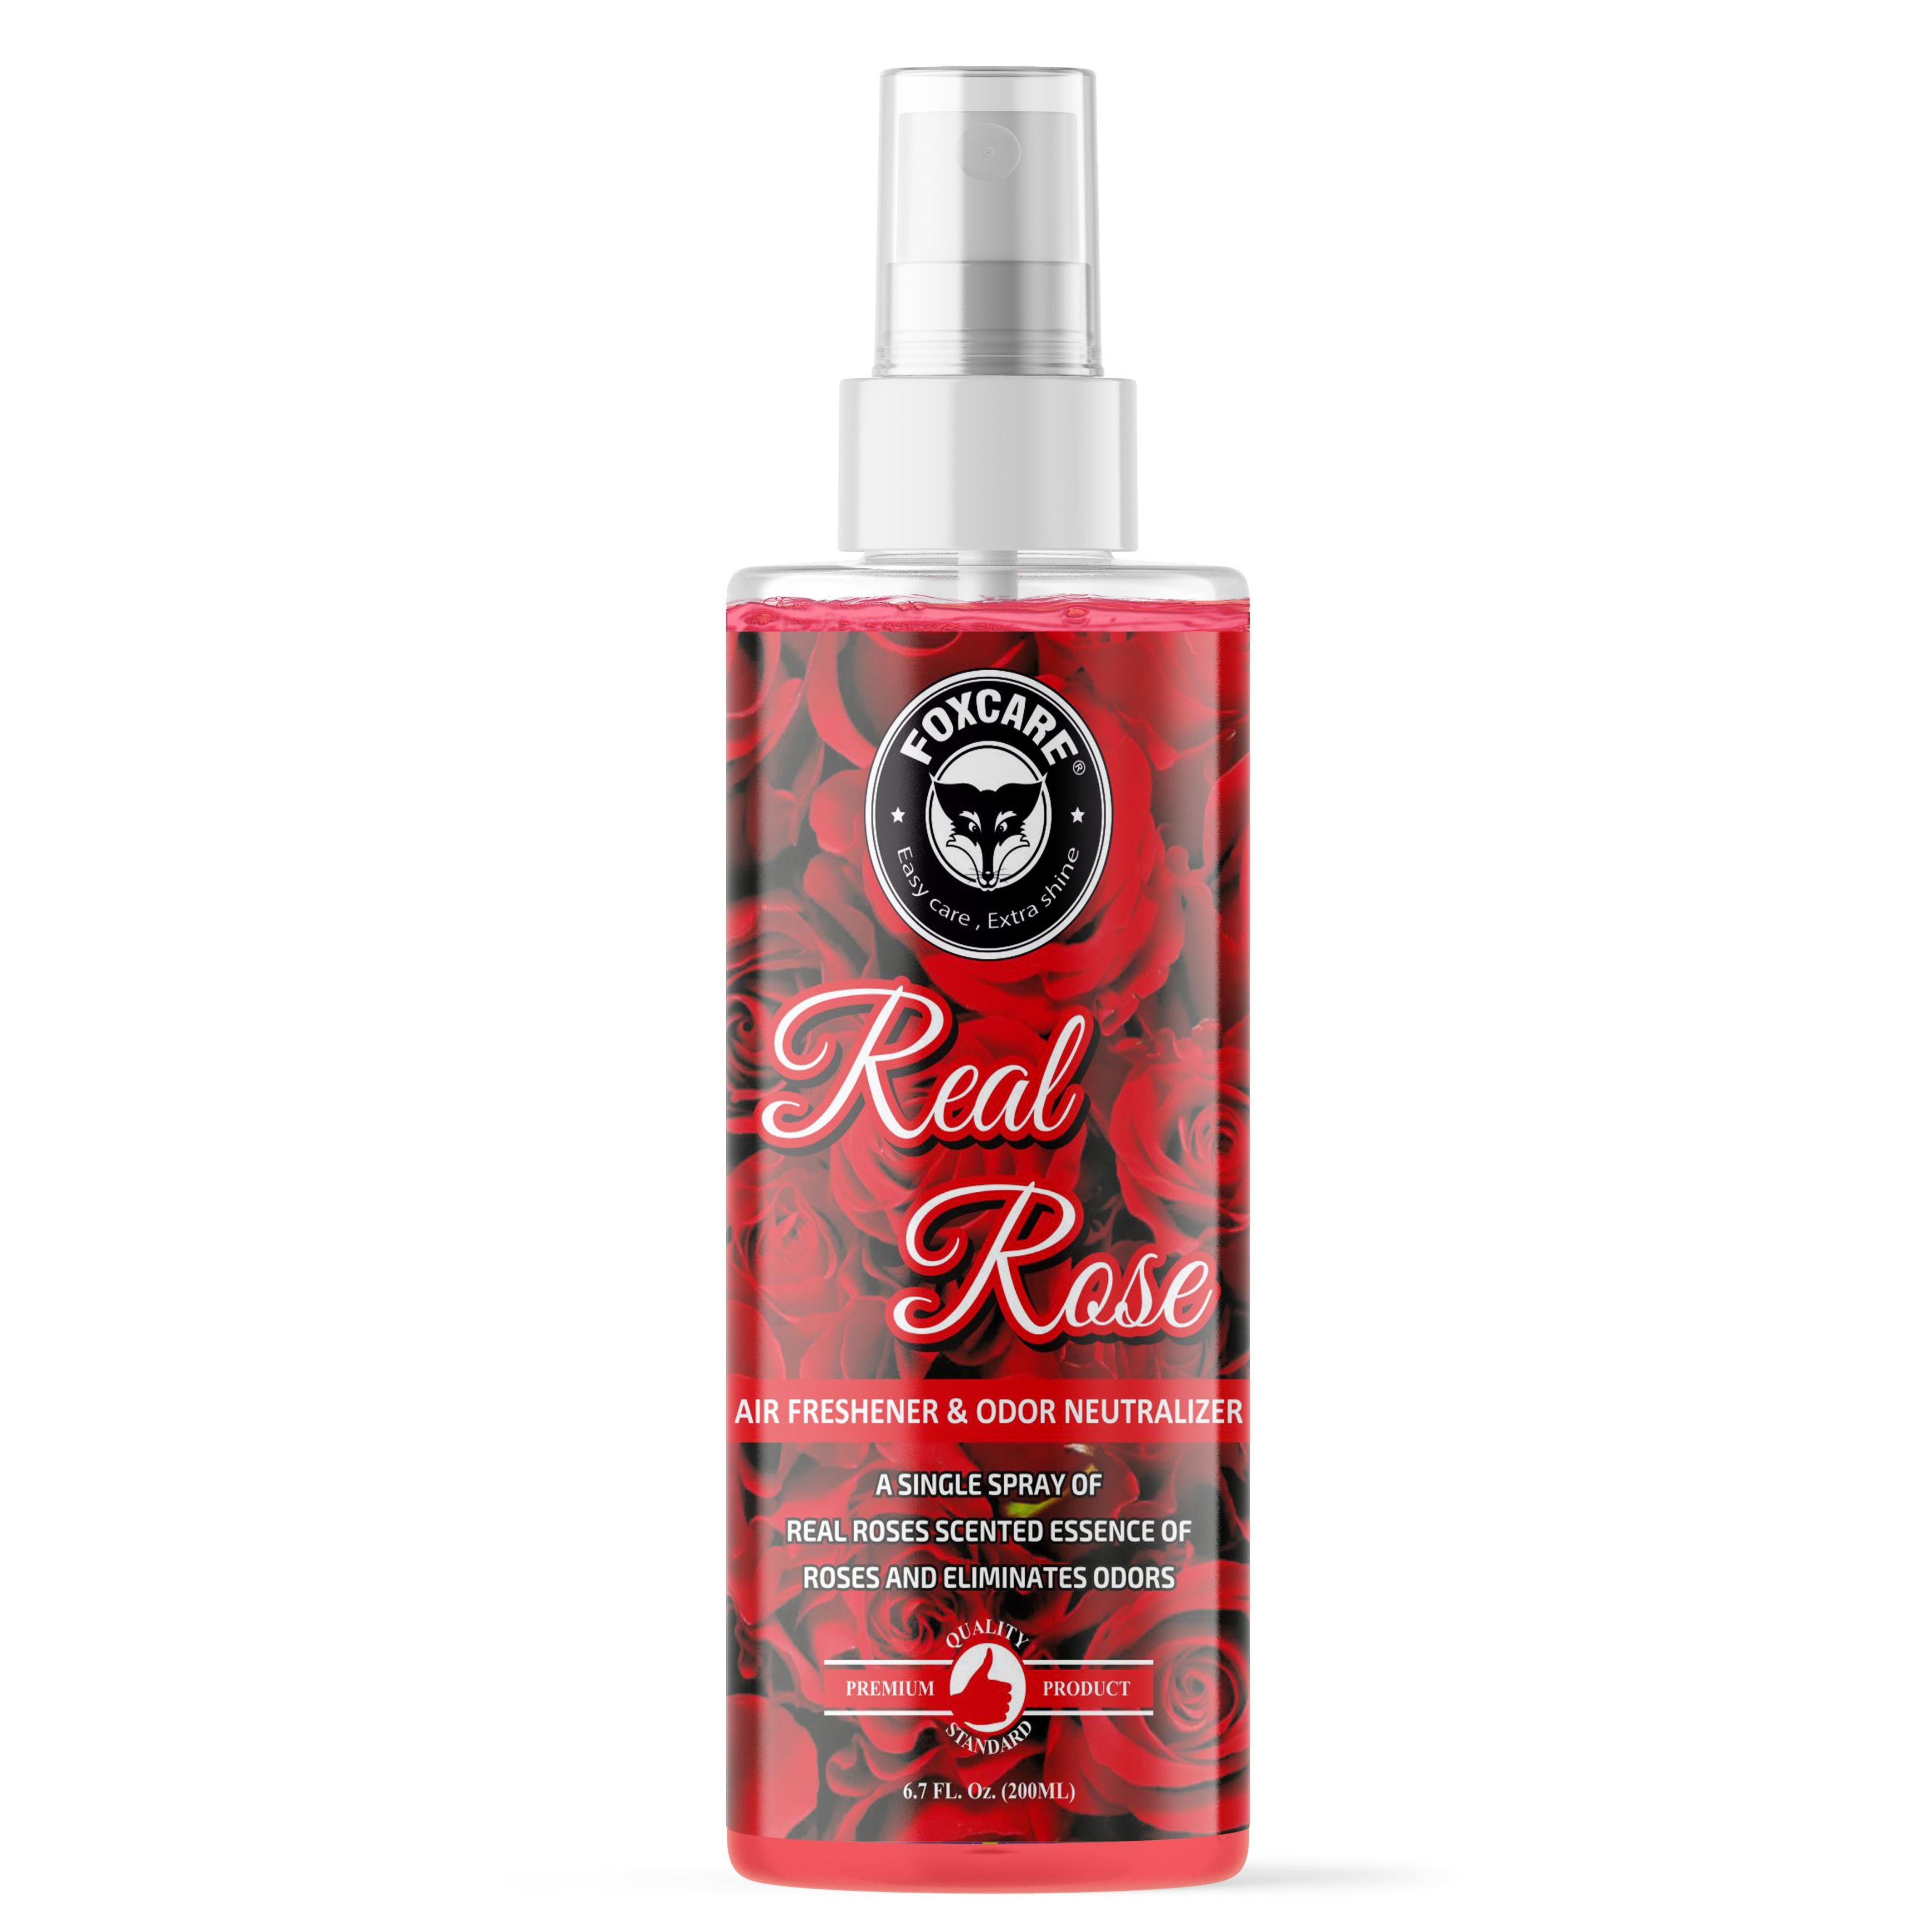 FOXCARE REAL ROSE AIR FRESHENER & ODOR NEUTRALIZER(200 ml)